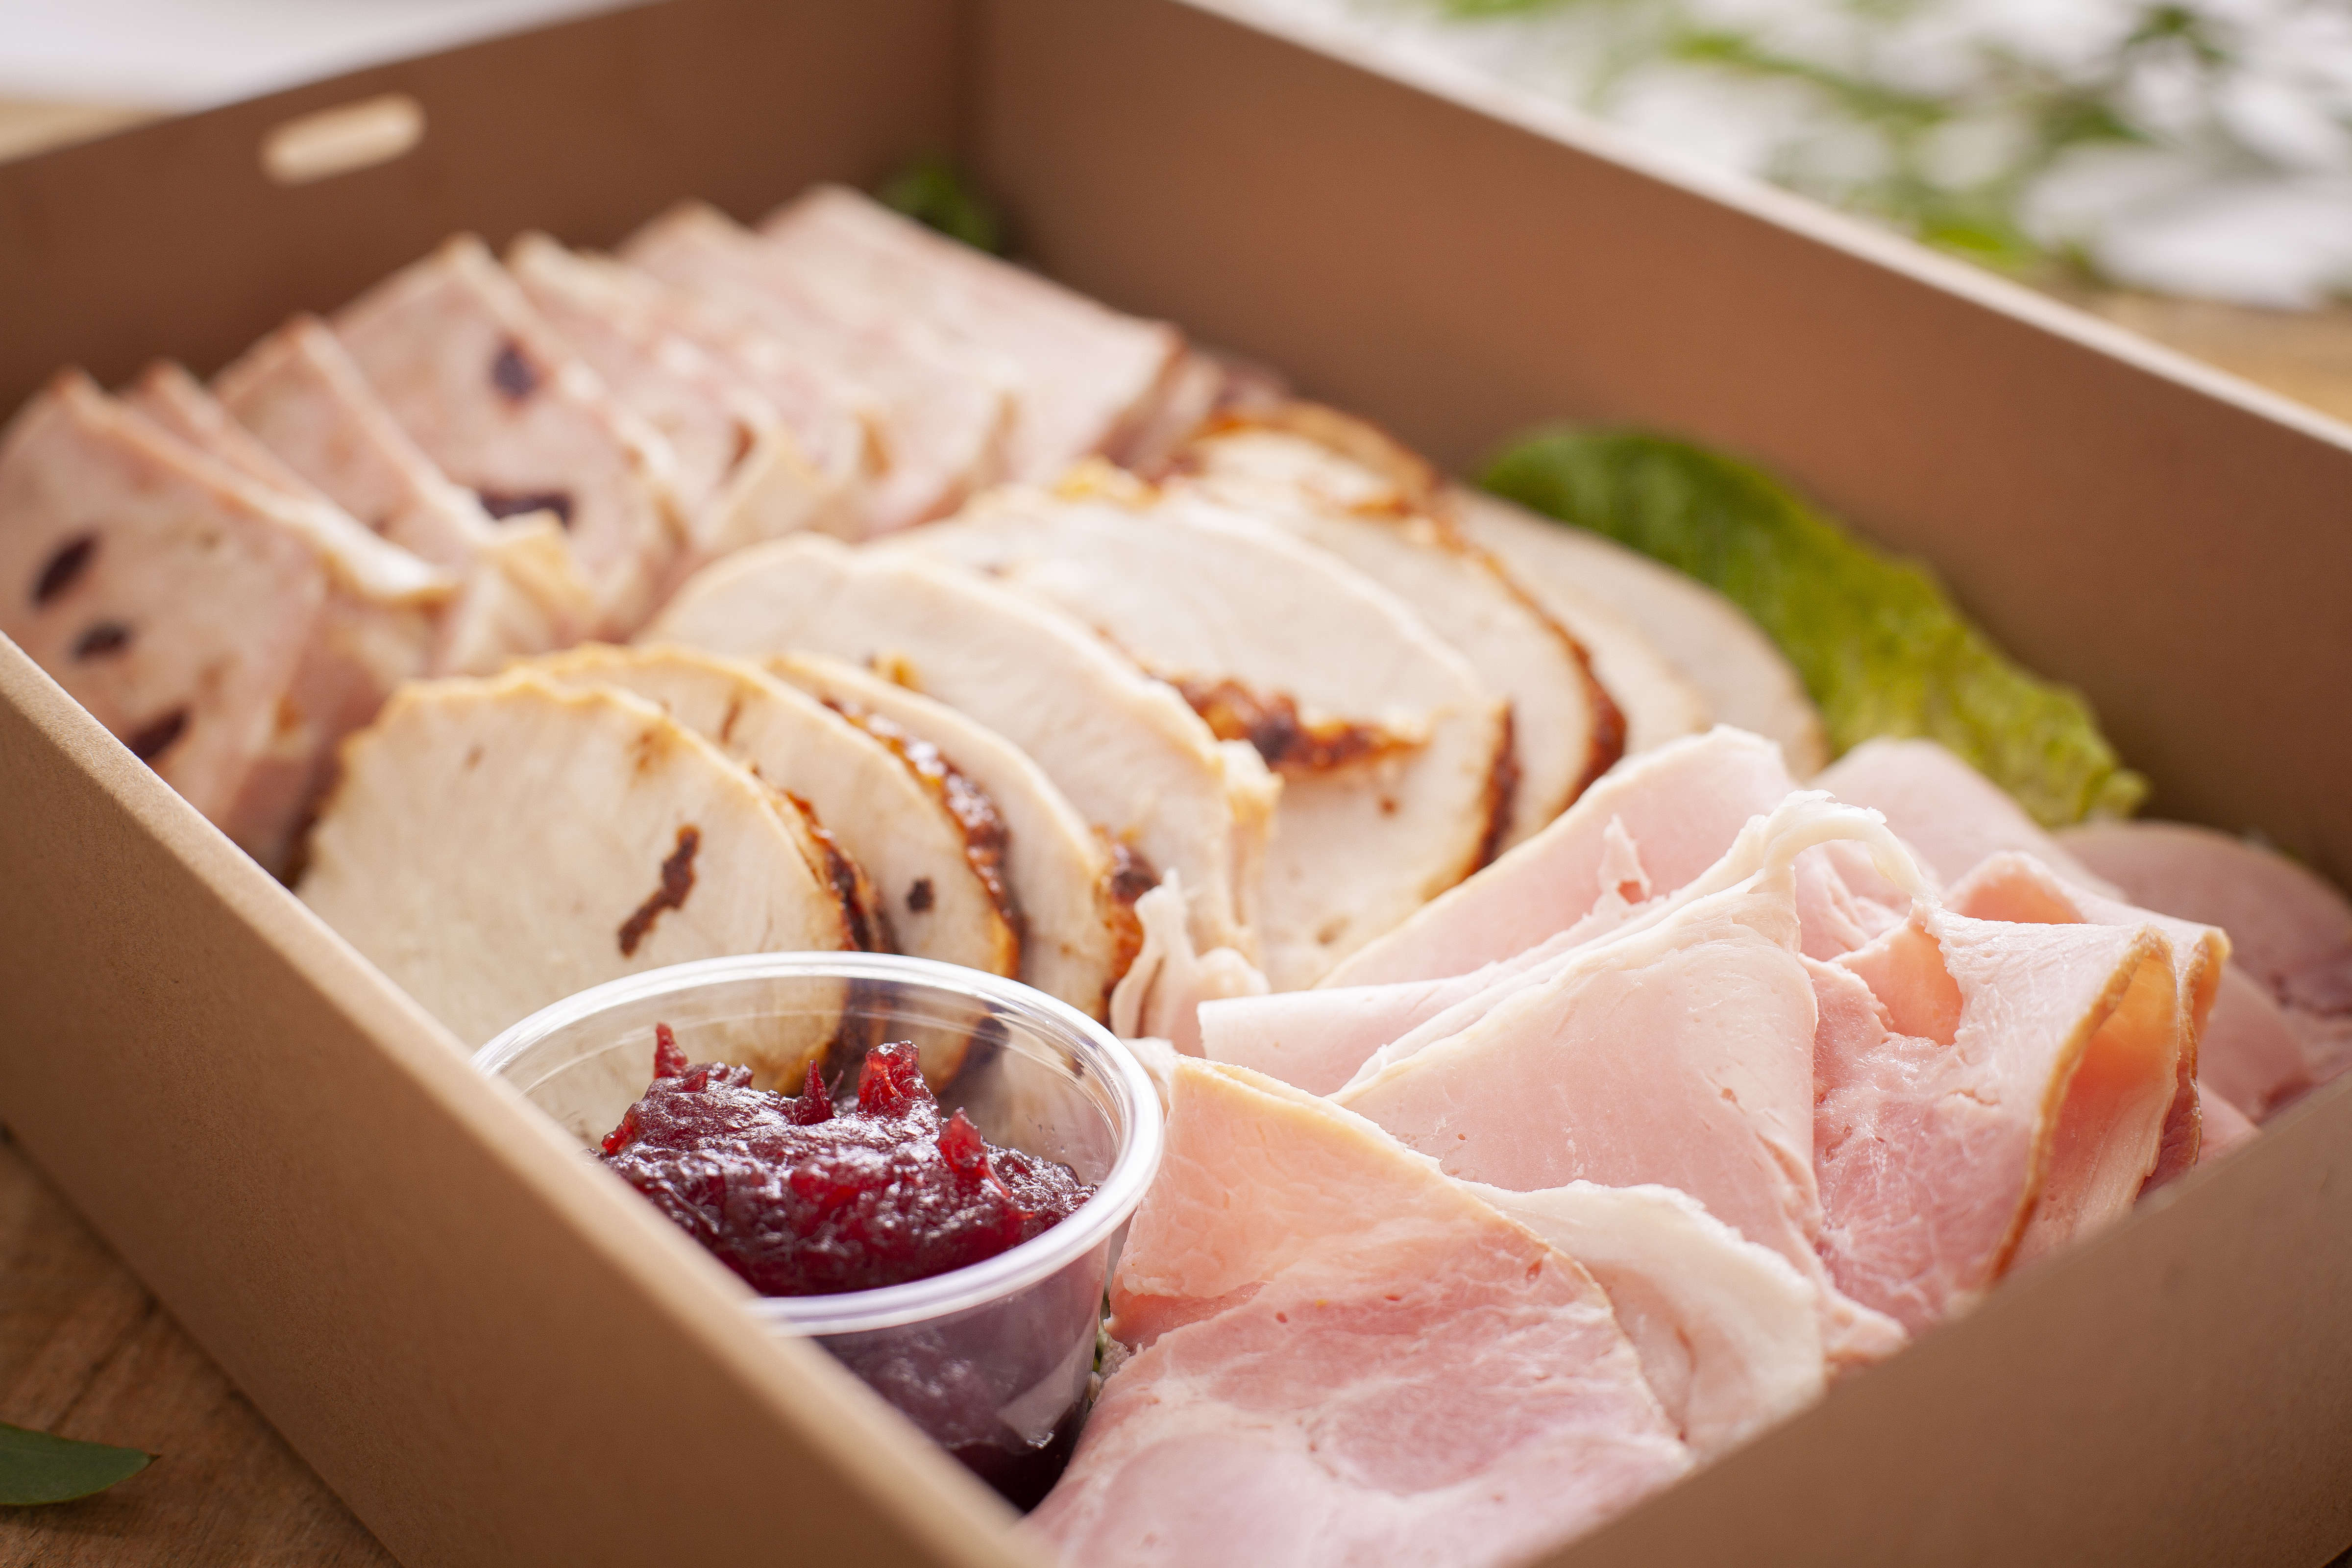 Cold meats catering box featuring quince glazed roast, turkey, Scottsdale ham, chicken and cranberry terrine, and cranberry sauce. Photo: Richard Jupe.